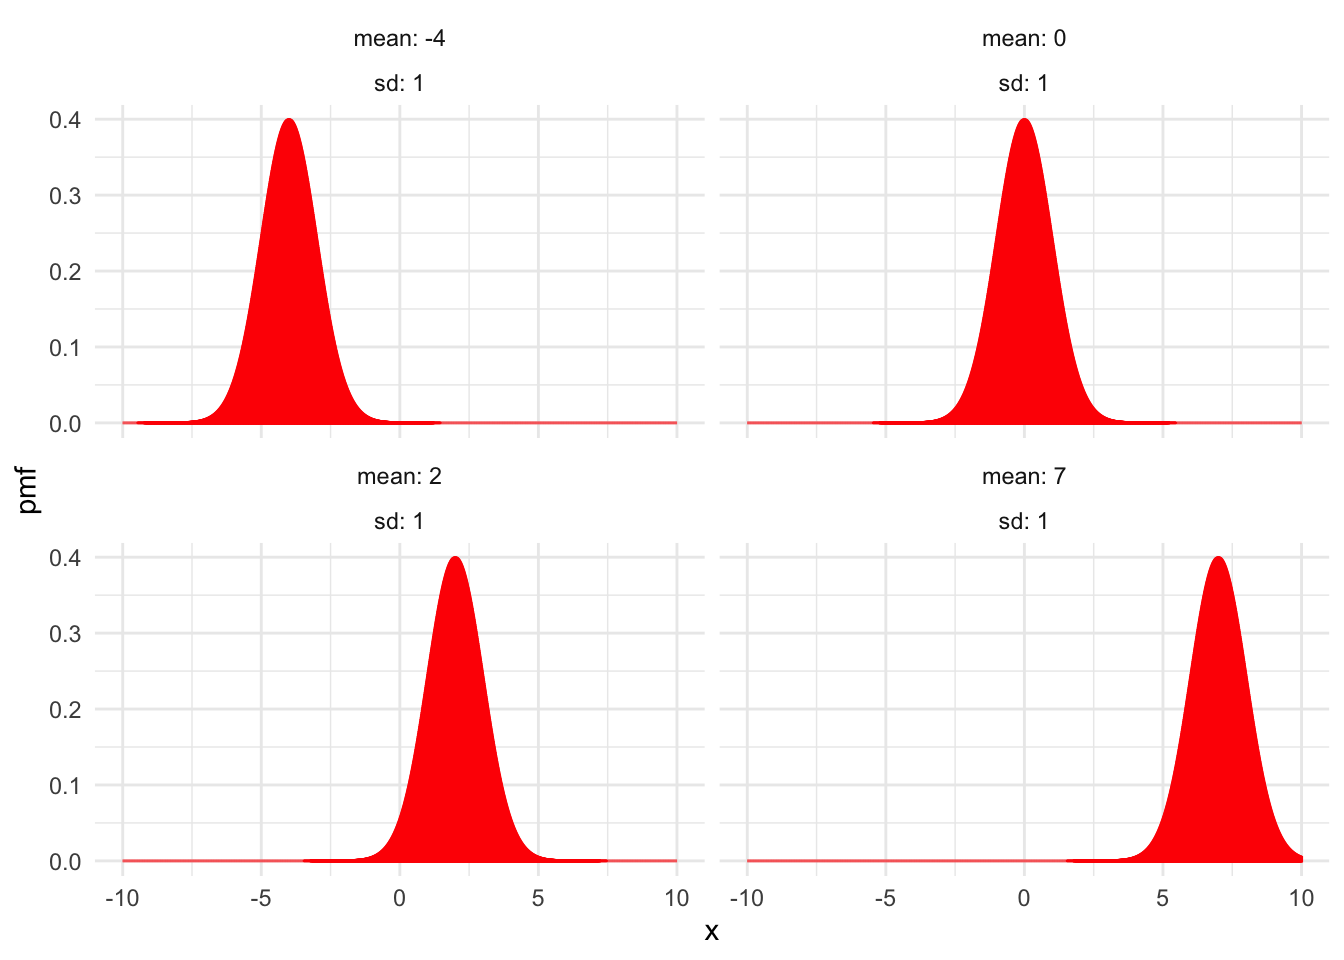 Normal distributions with $\sigma = 1$ and various values of $\mu$.